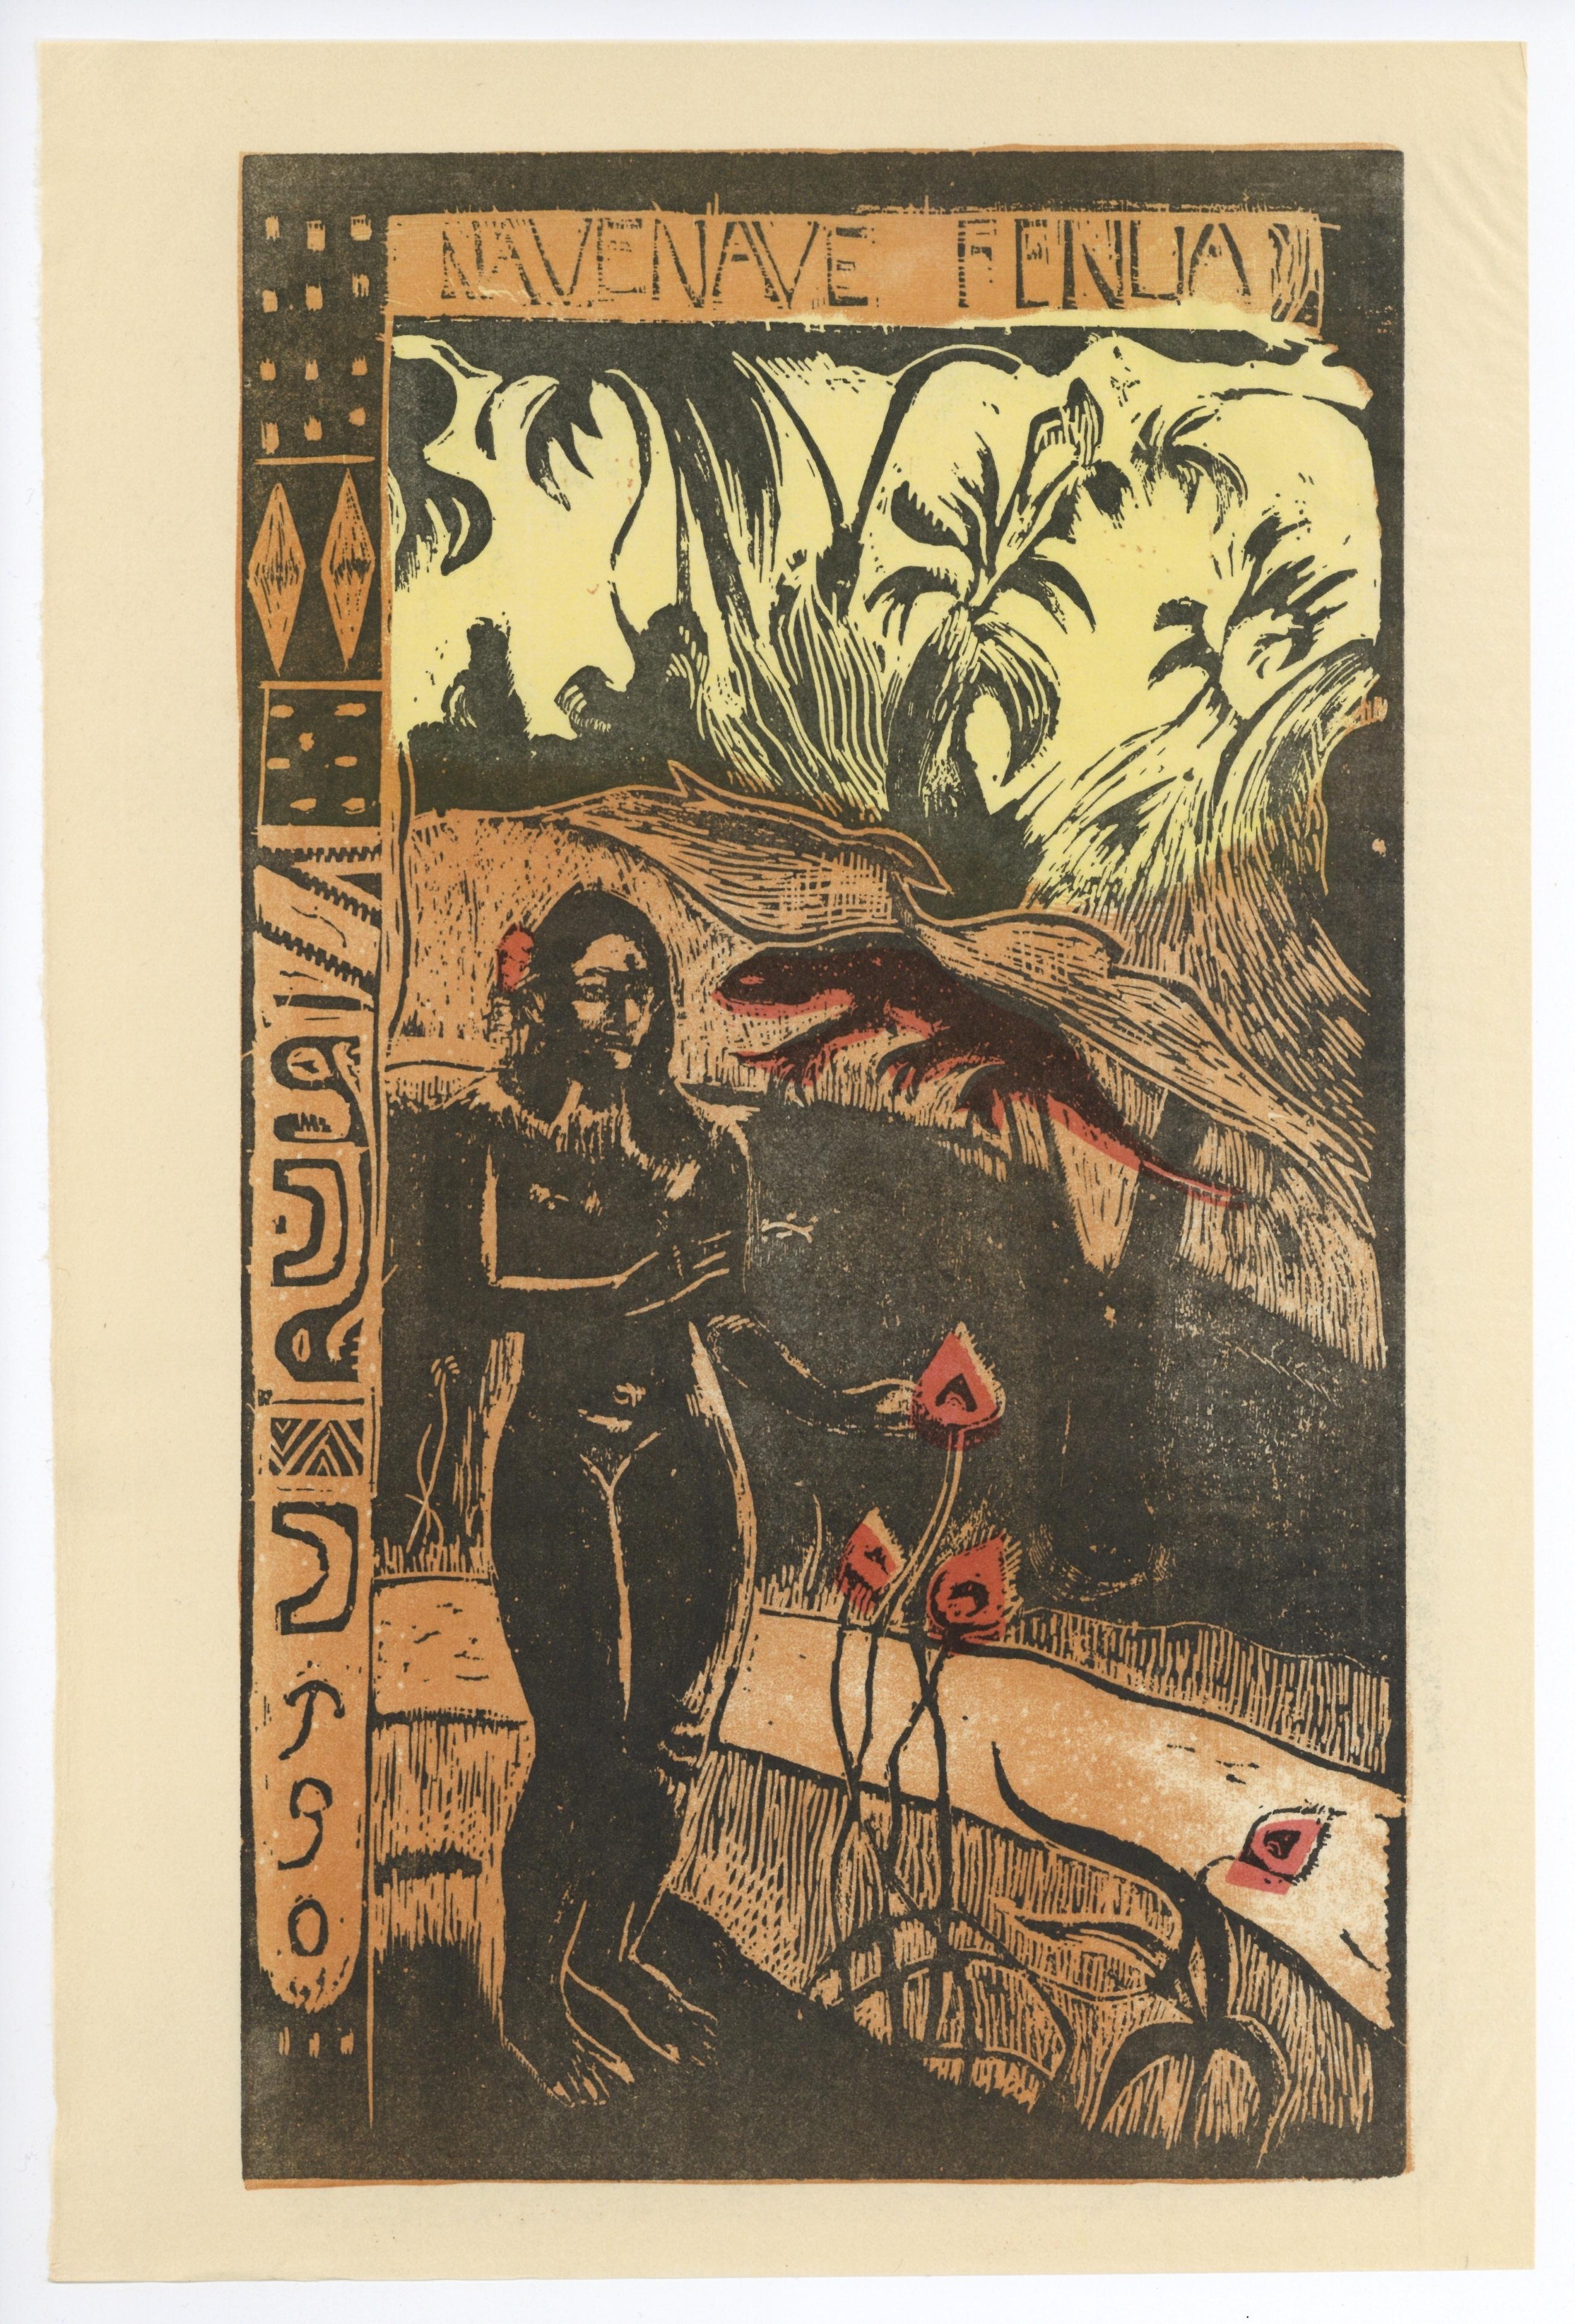 Nave Nave Fenua - Print by (after) Paul Gauguin